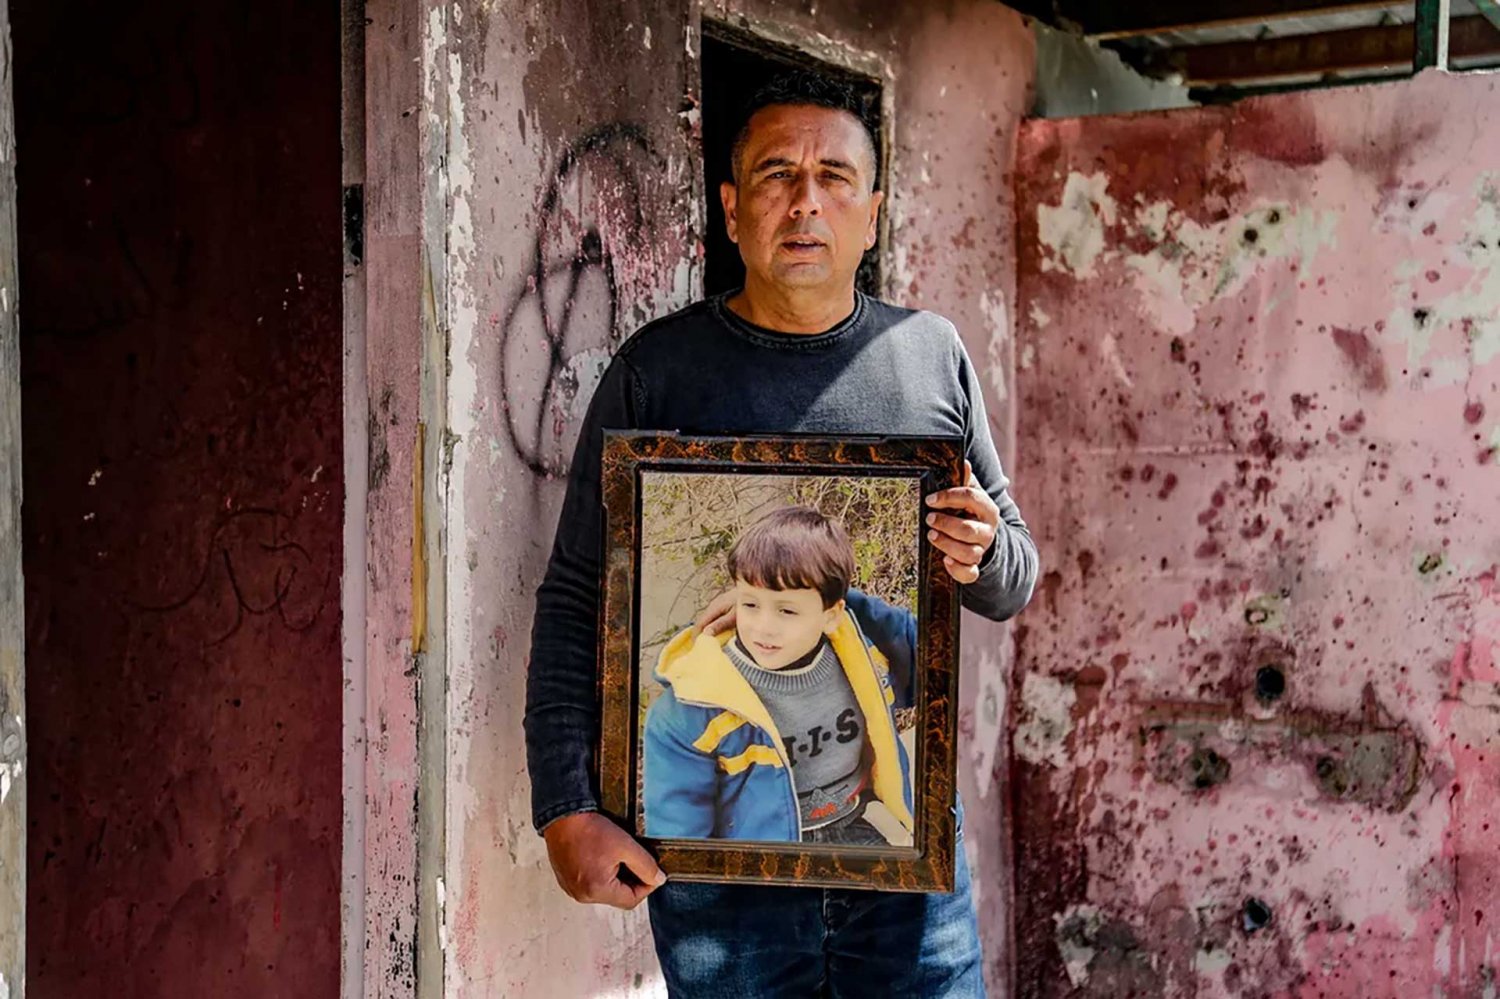 Abed Salama holds a photo of his late son, Milad.